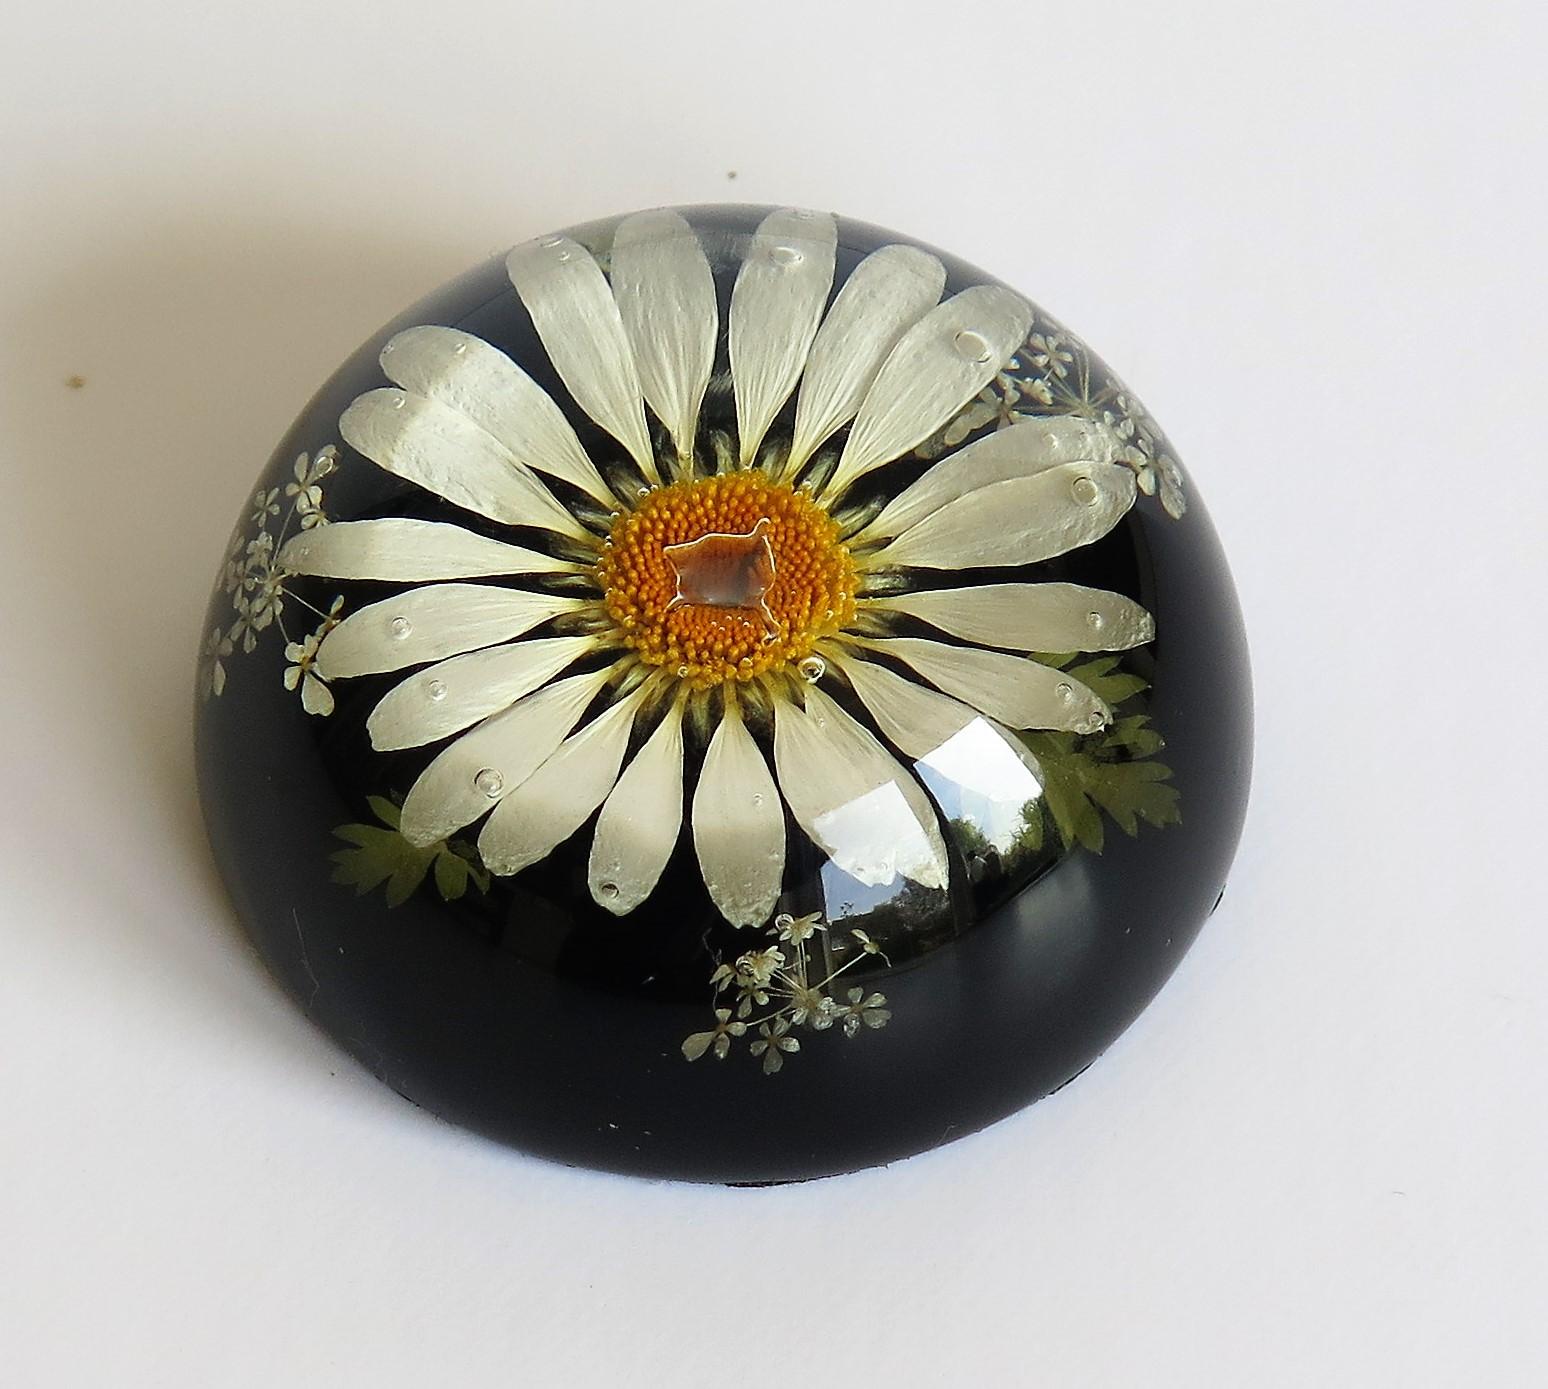 Folk Art Daisy Paperweight Handmade with Real Flowers by Sarah Rogers, English